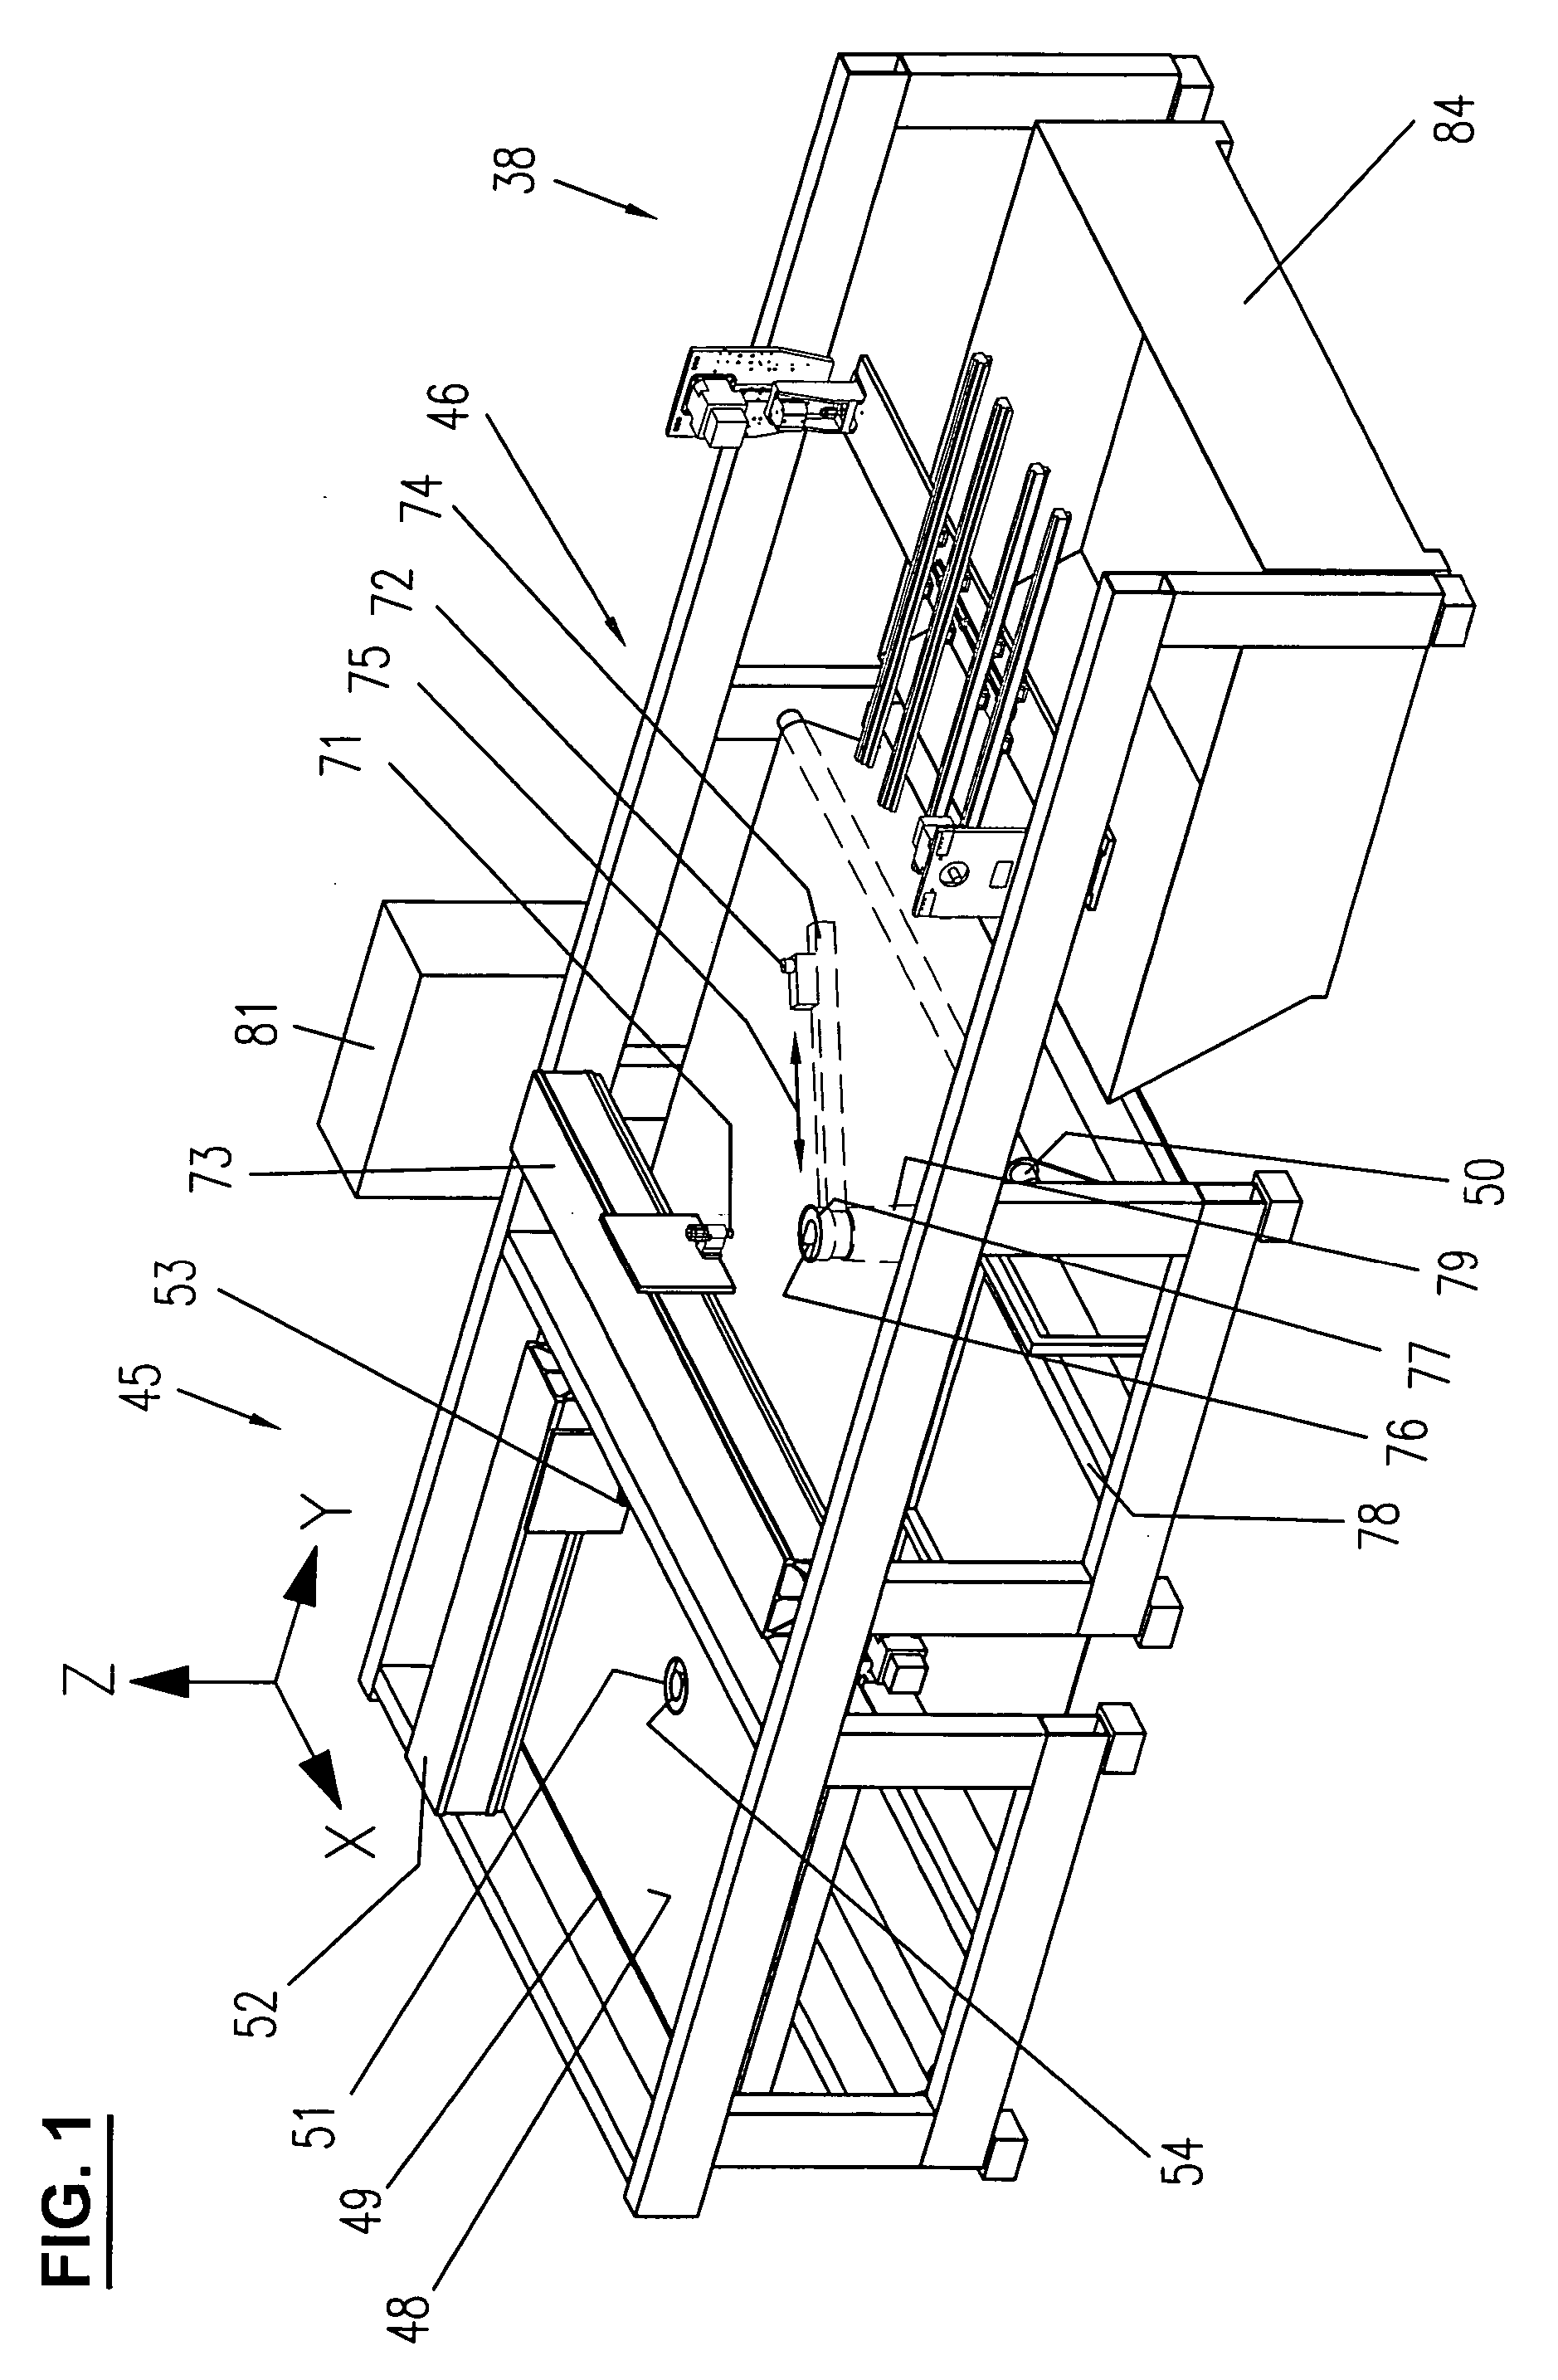 Device and method for breaking glass panes